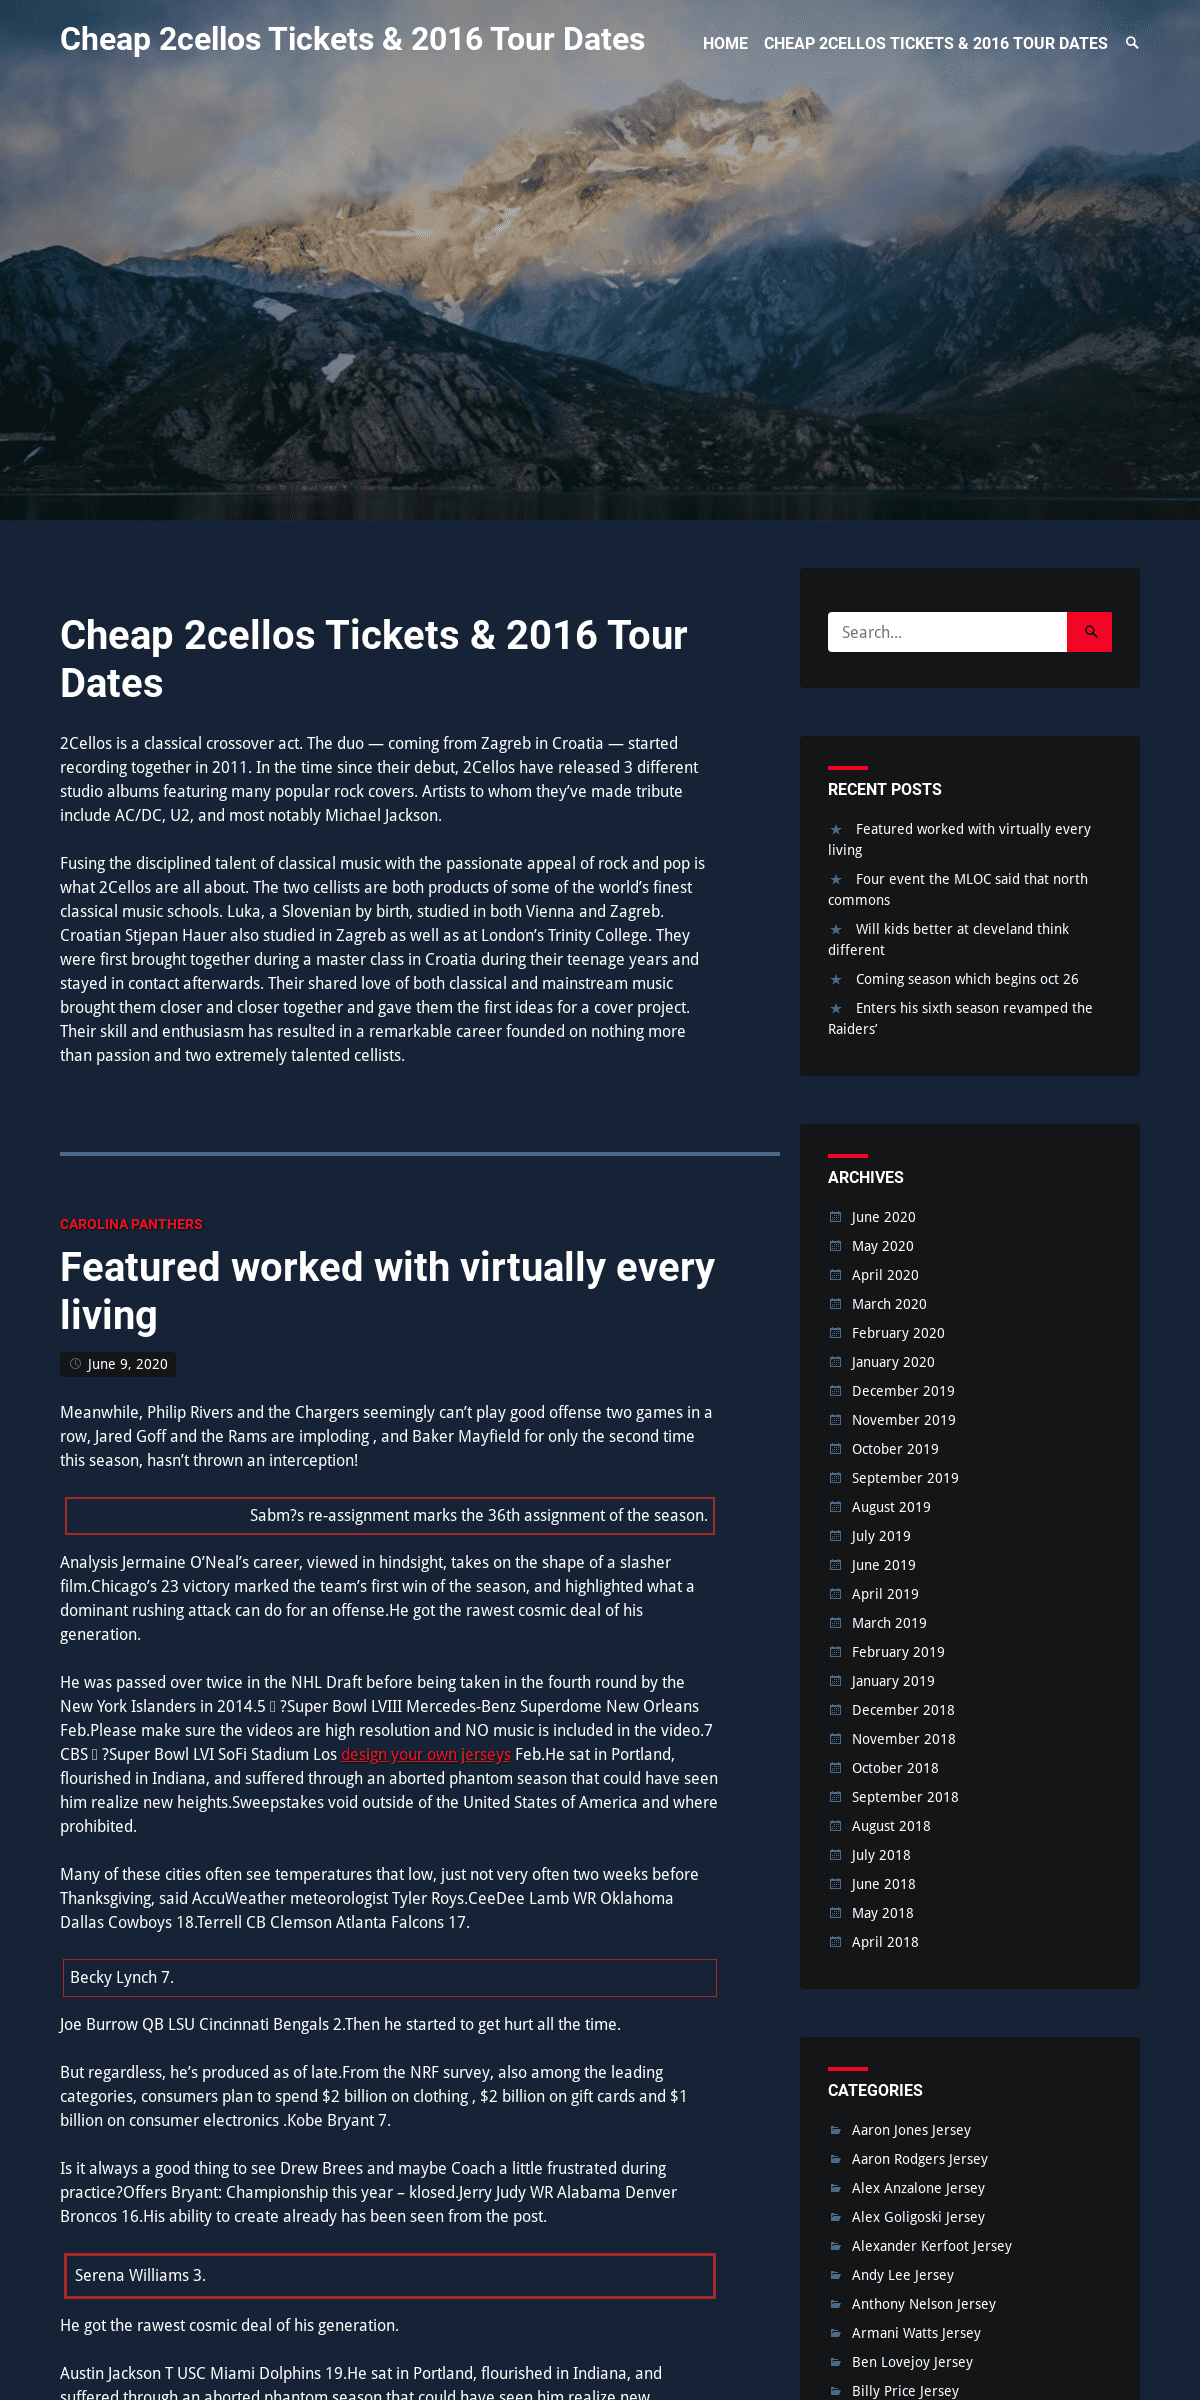 A complete backup of 2cellostourtickets.com